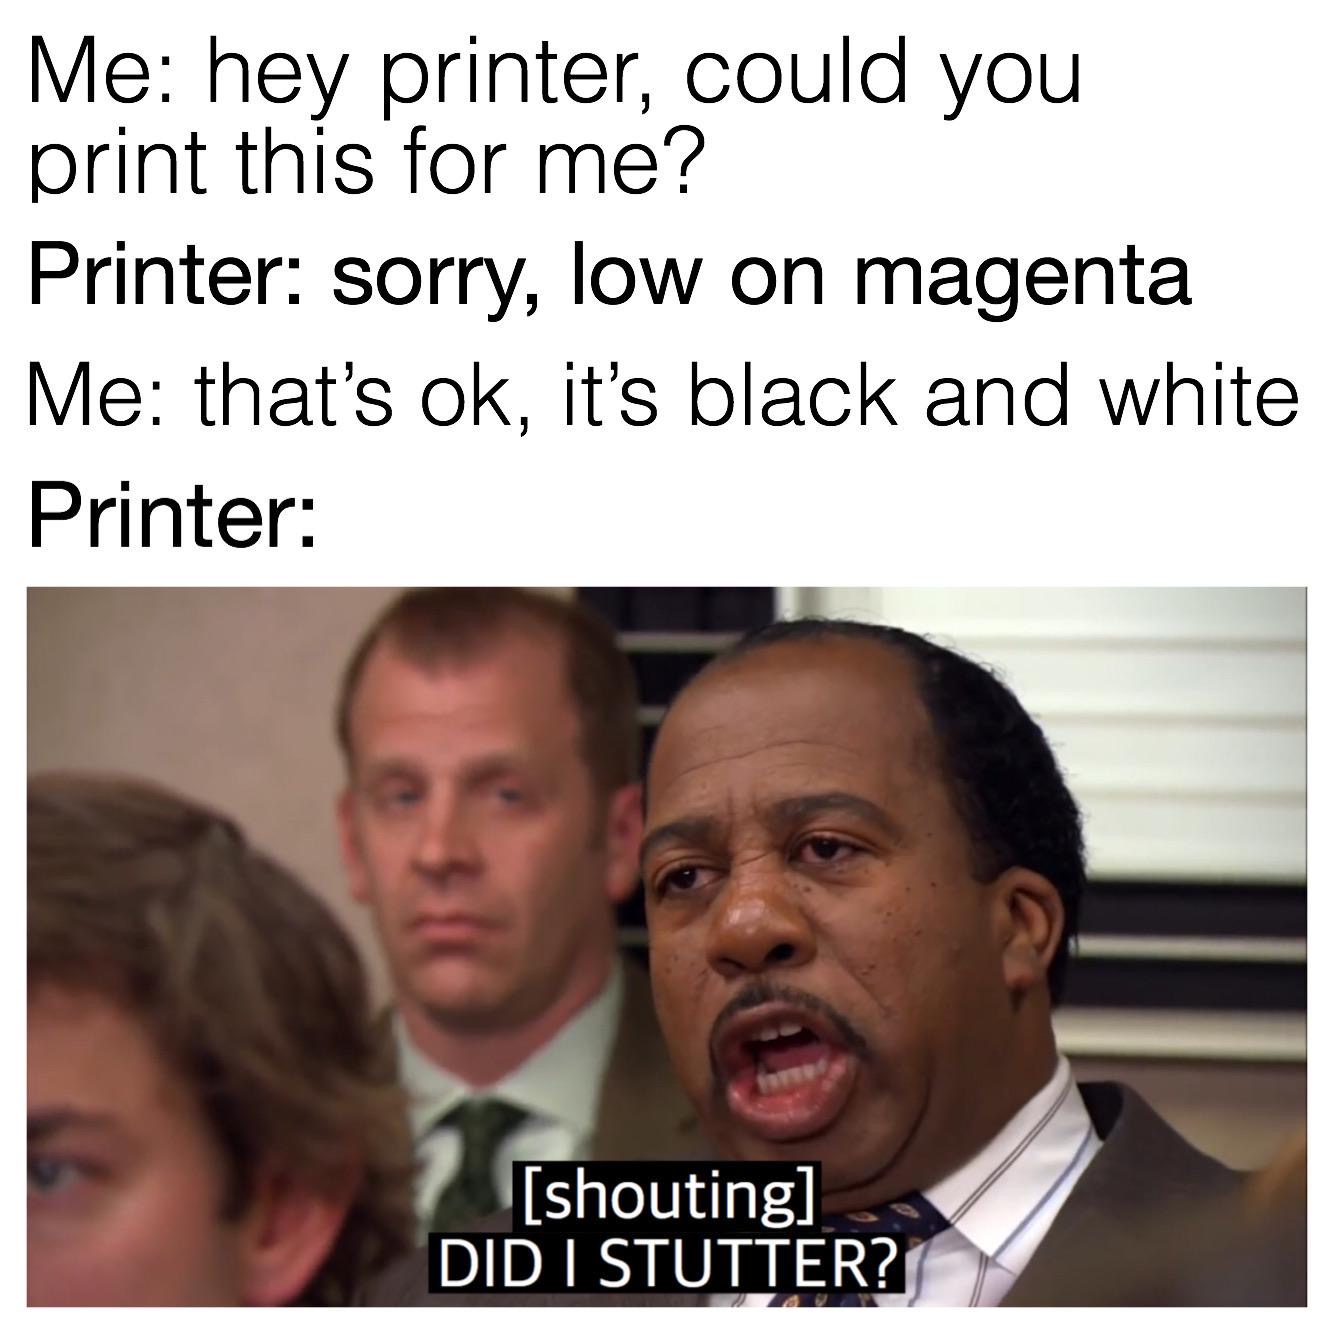 losers club memes - Me hey printer, could you print this for me? Printer sorry, low on magenta Me that's ok, it's black and white Printer shouting Did I Stutter?